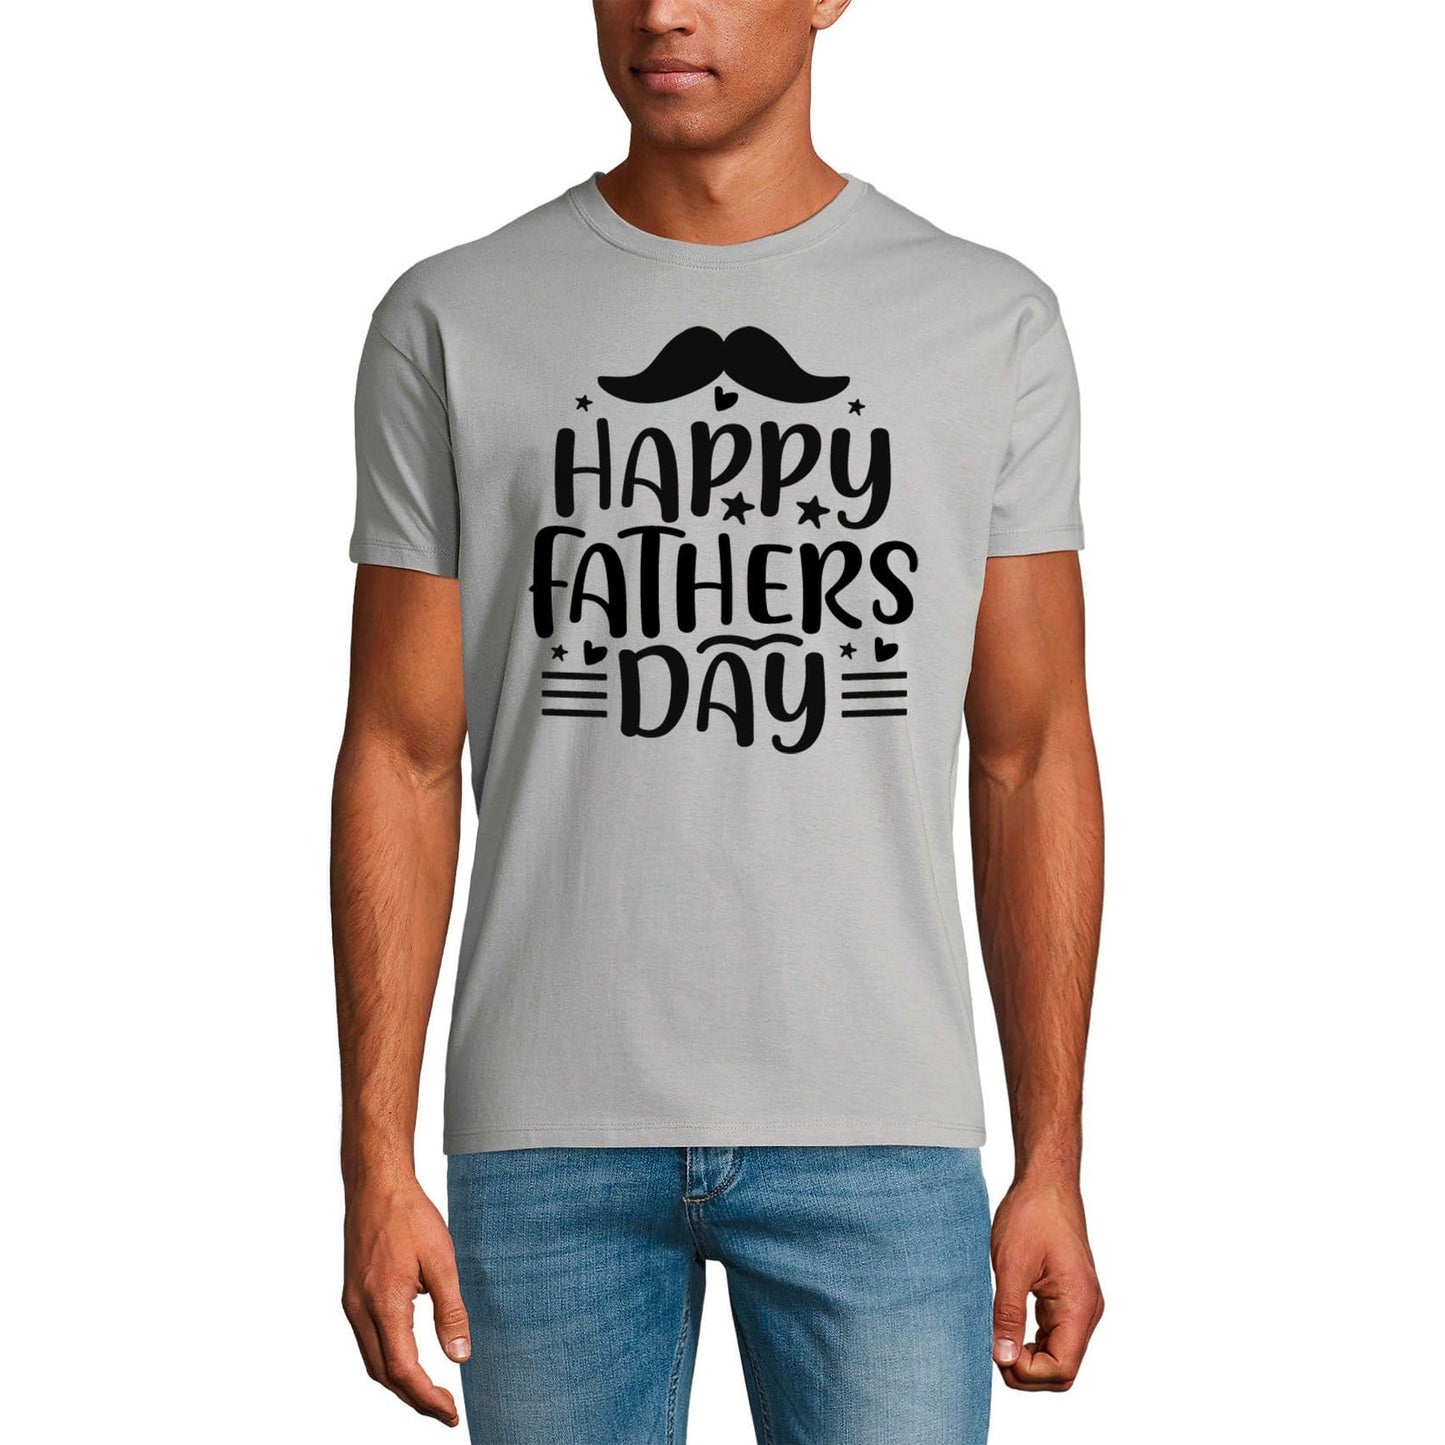 ULTRABASIC Men's Graphic T-Shirt Happy Father's Day - Funny Daddy Shirt